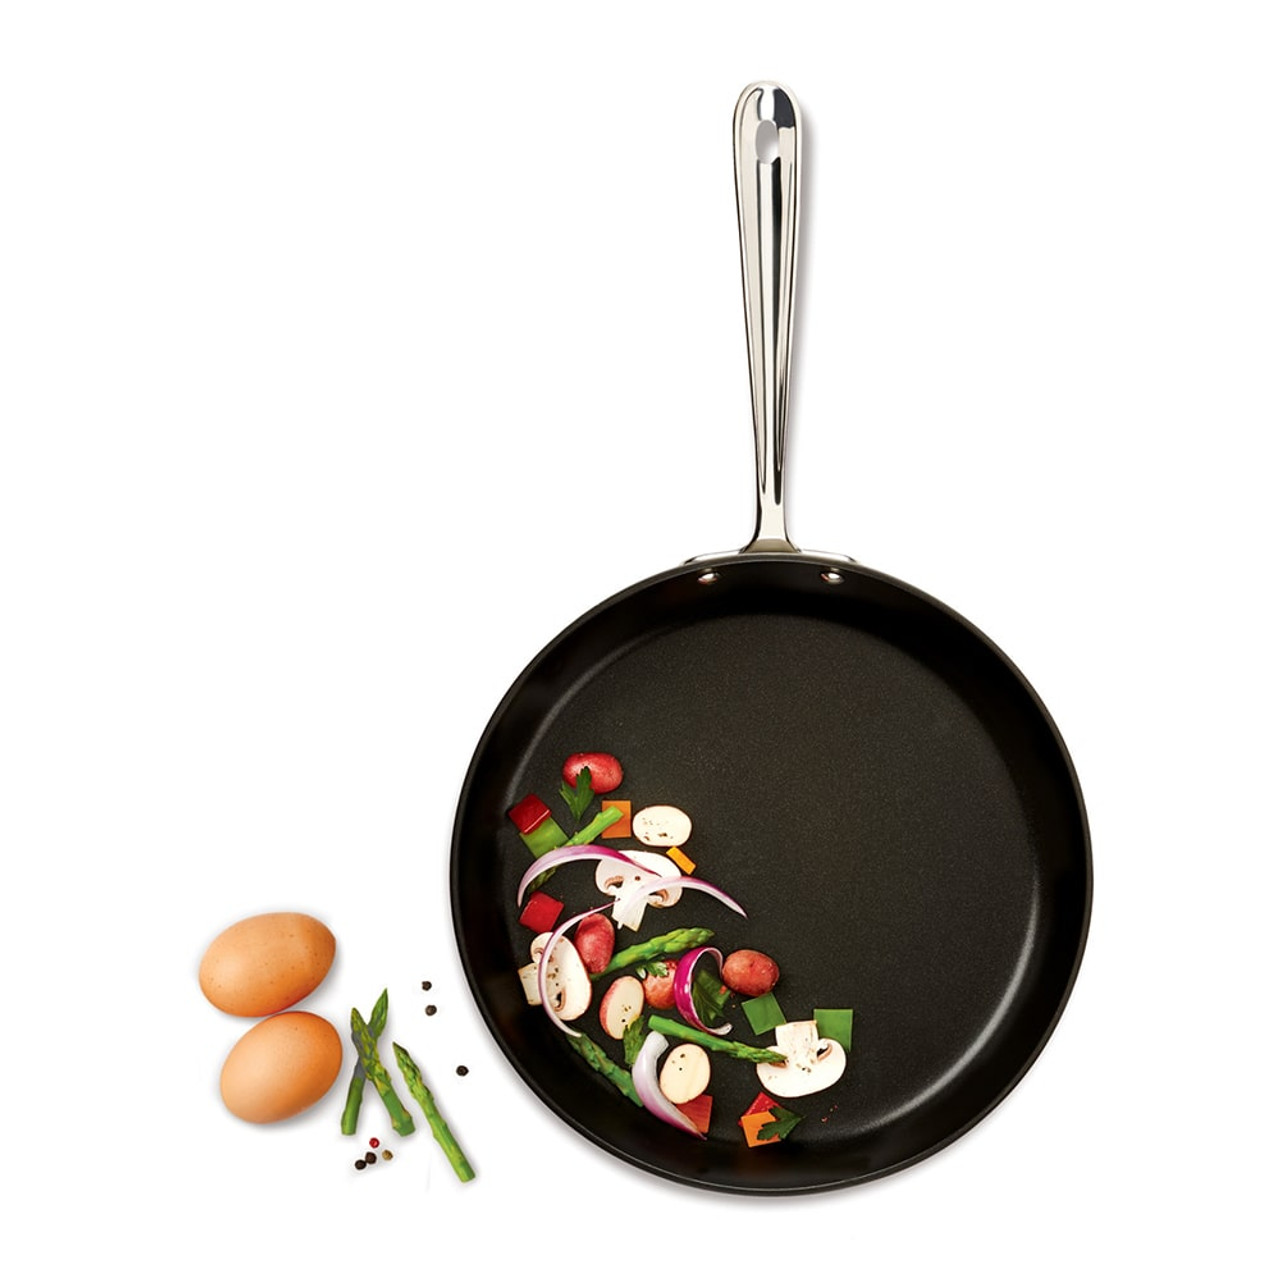 https://cdn11.bigcommerce.com/s-hccytny0od/images/stencil/1280x1280/products/520/8391/all-clad-ha1-10-12-inch-fry-pan-set-4__04378.1580247074.jpg?c=2?imbypass=on